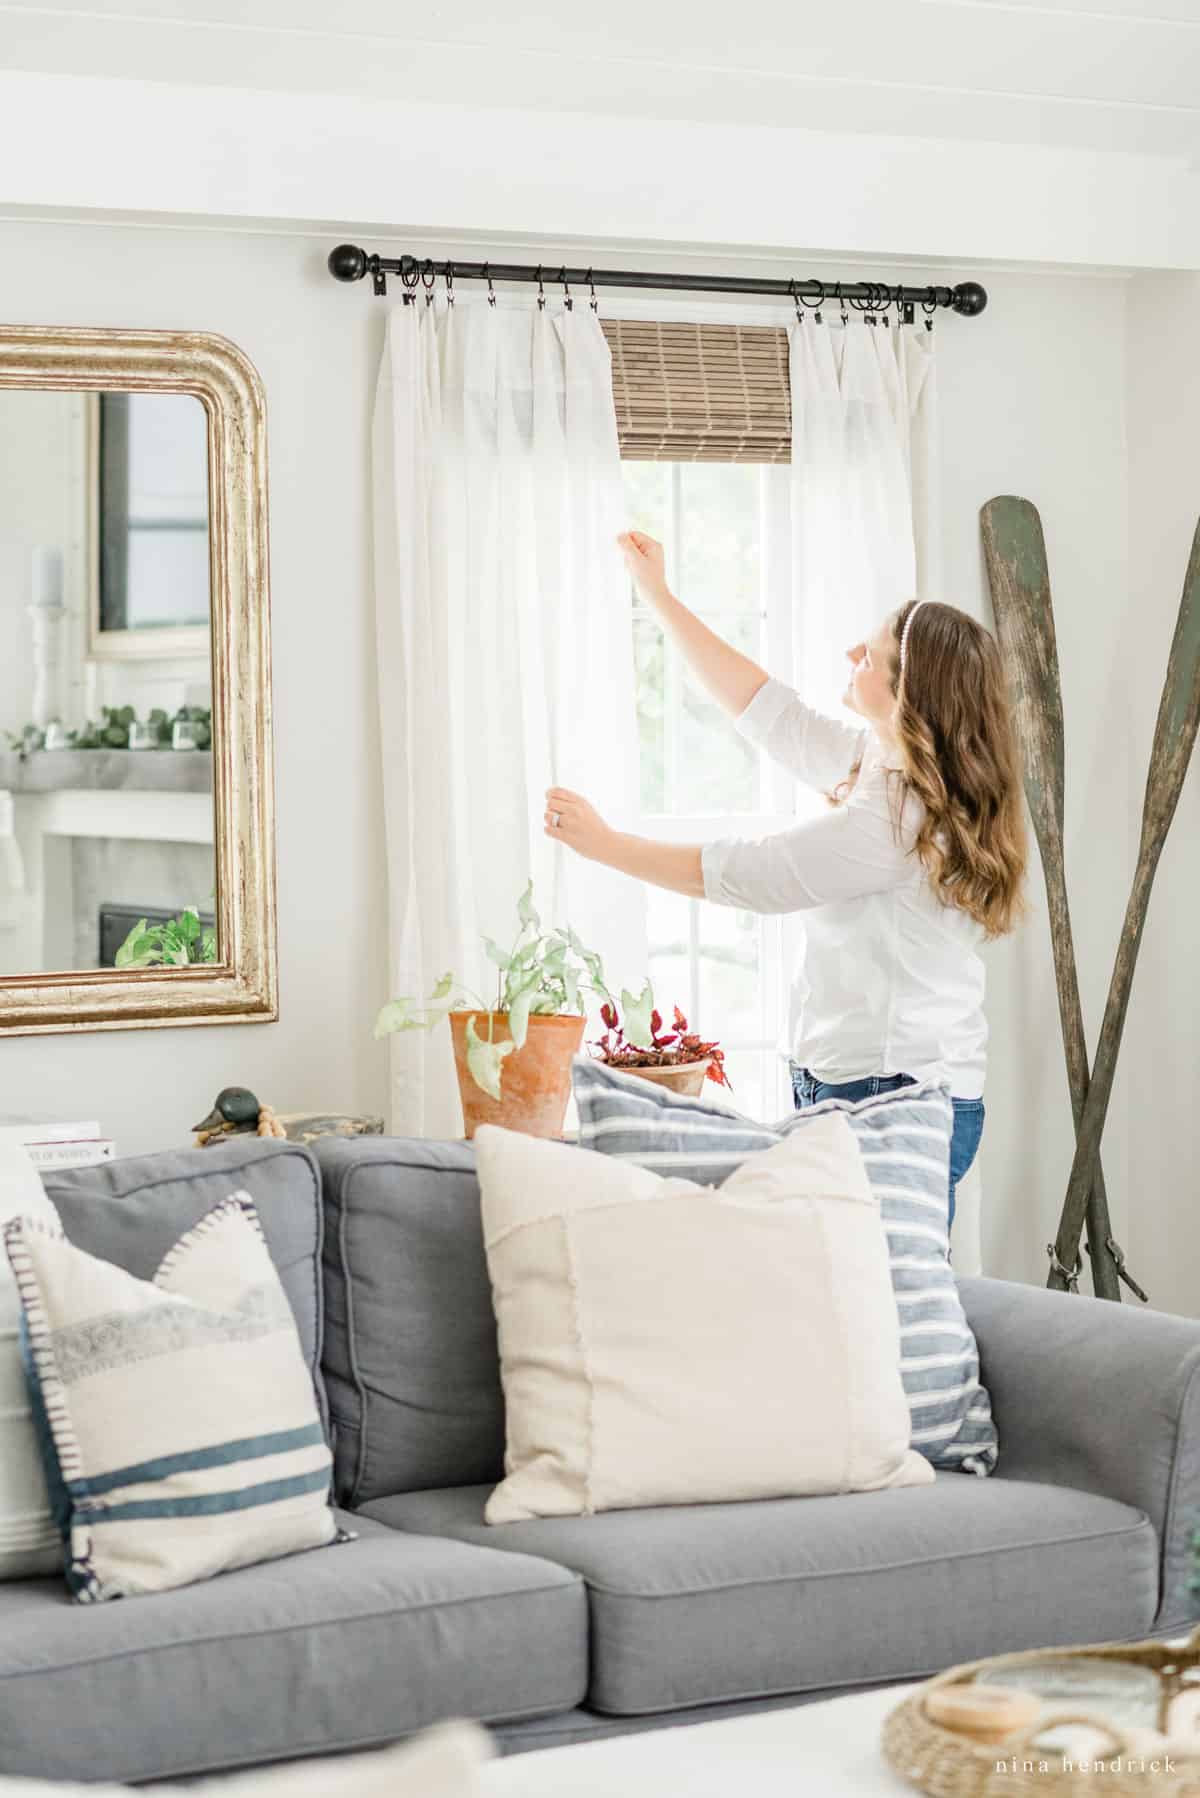 Nina Hendrick how to choose window treatments during the decorating process